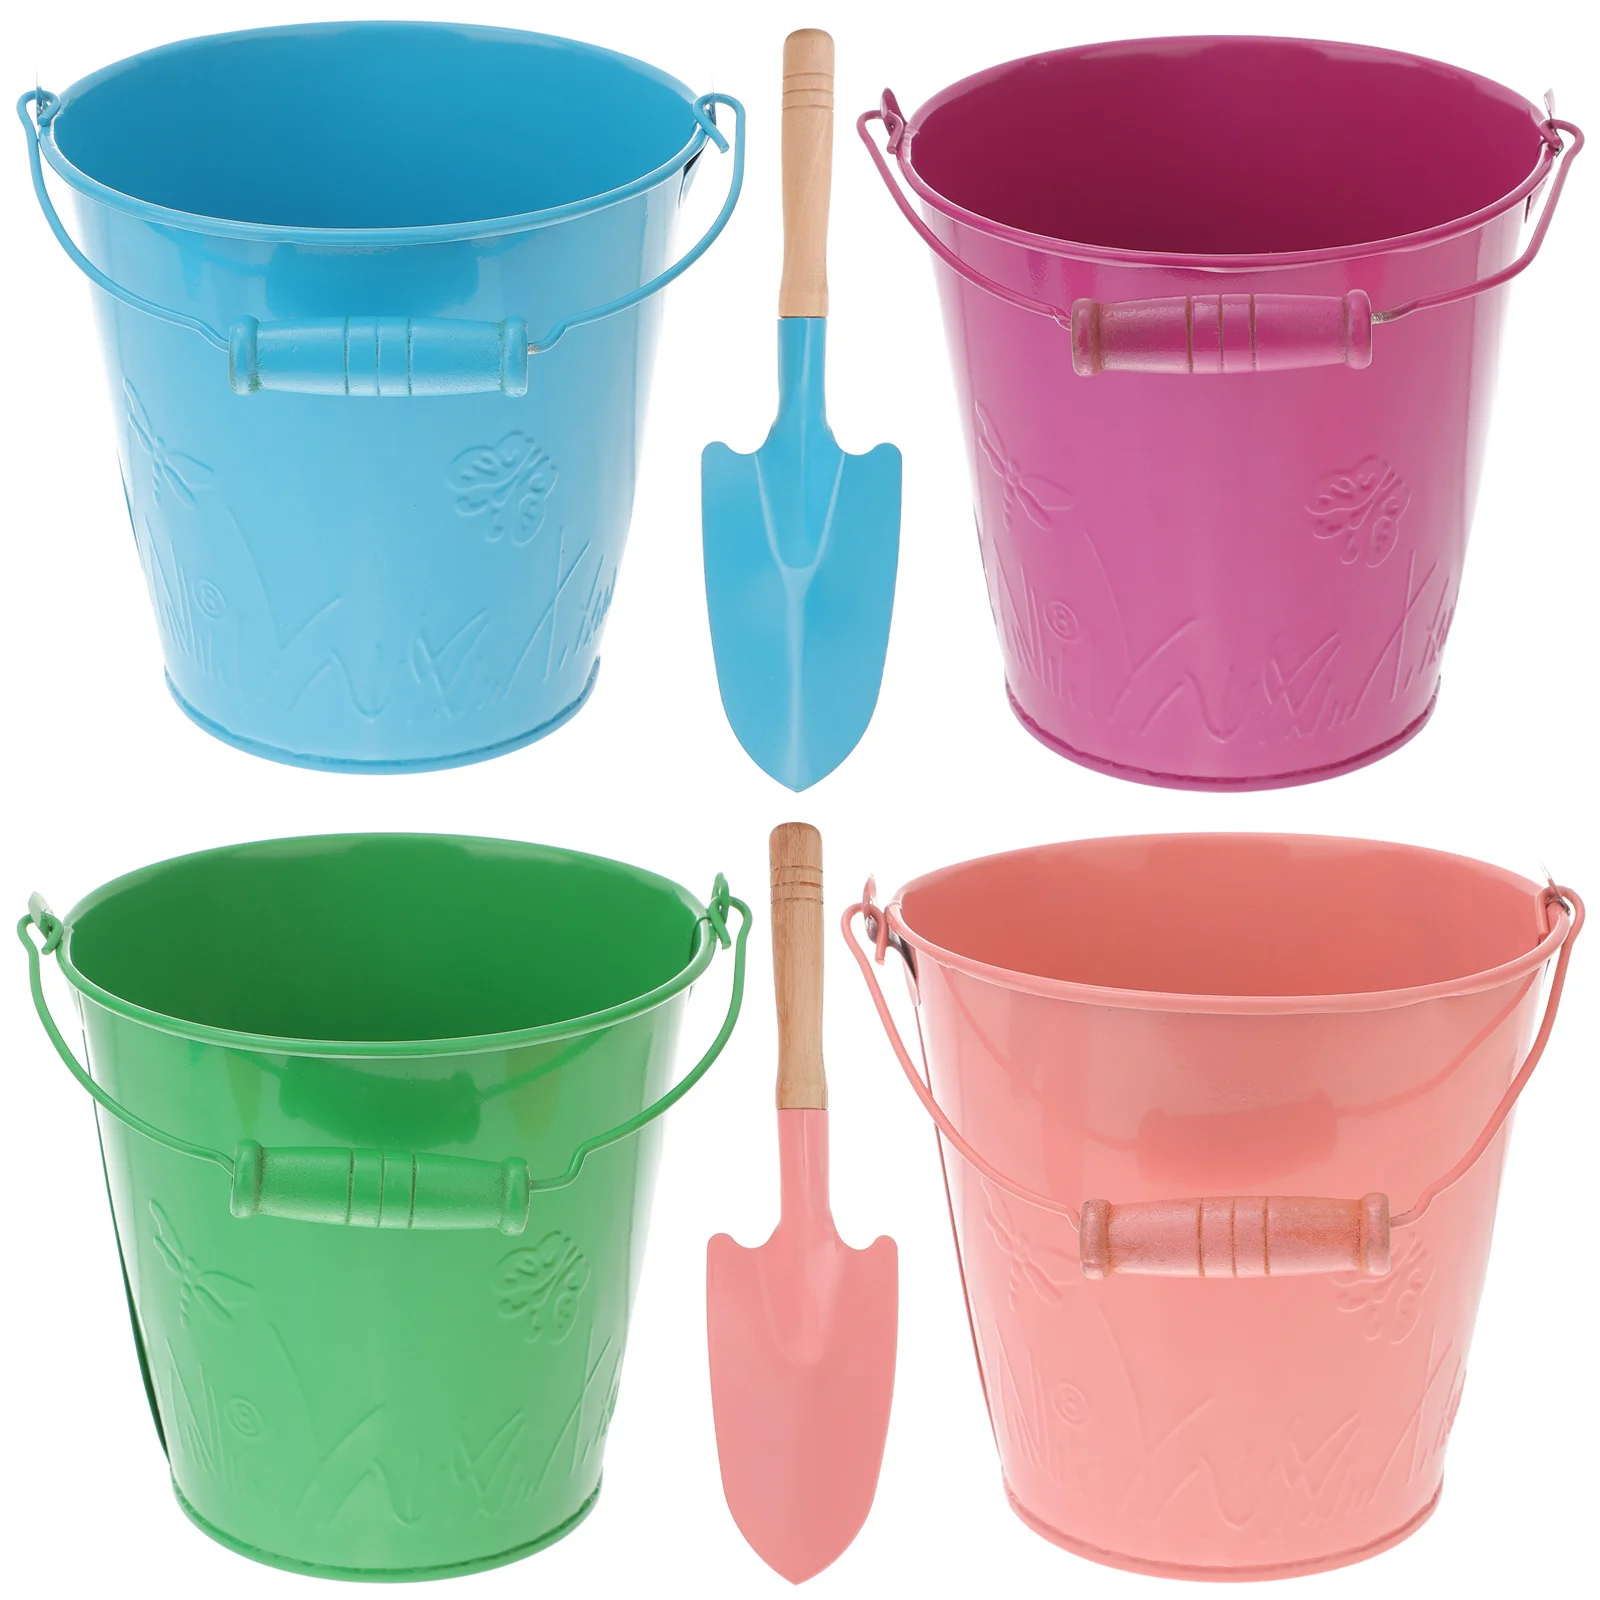 

6 Pcs Gardening Tin Bucket Beach Sand Play Set for Toddlers Playing Toy Water Playthings Outdoor Iron Kids